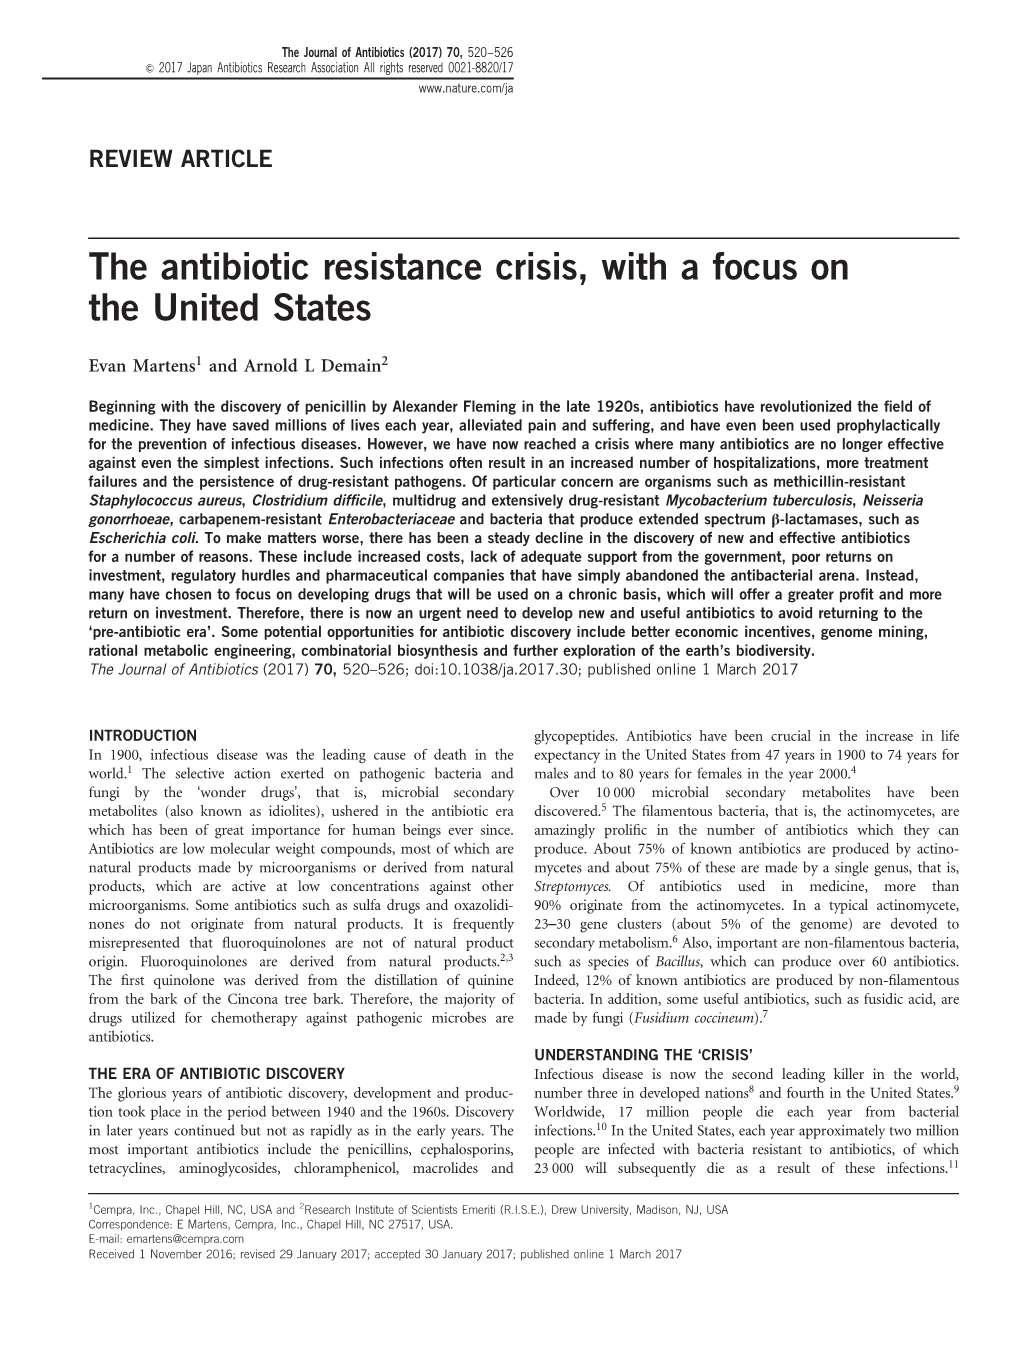 The Antibiotic Resistance Crisis, with a Focus on the United States